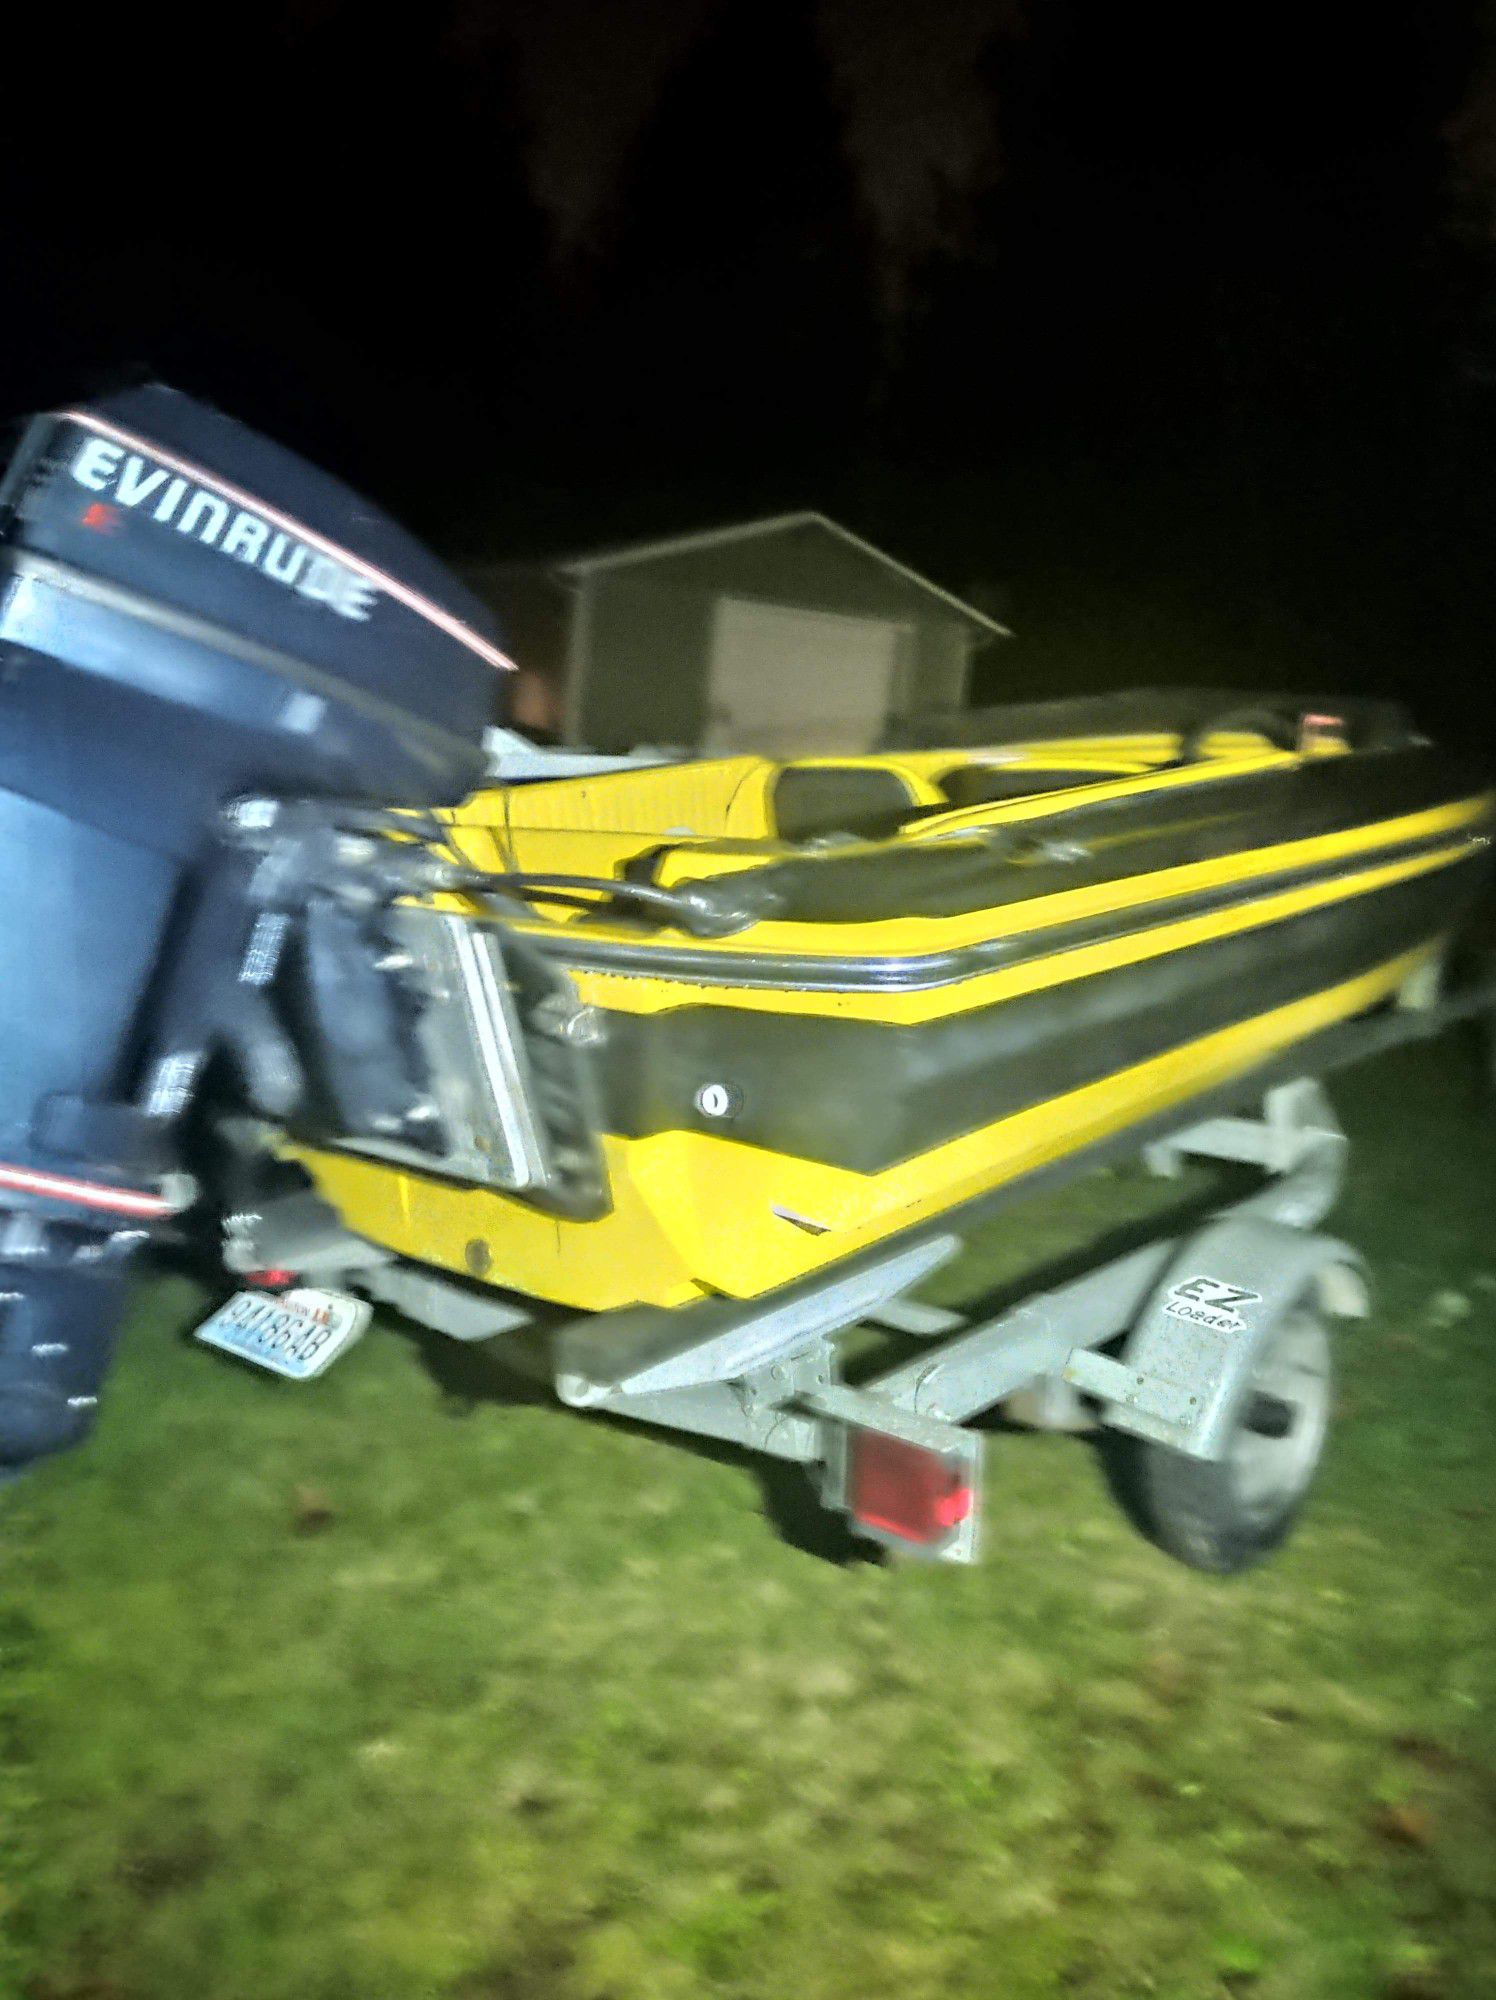 1965 Glaston Classic Boat with Evinrude Outboard Motor and EZ Loader Trailer